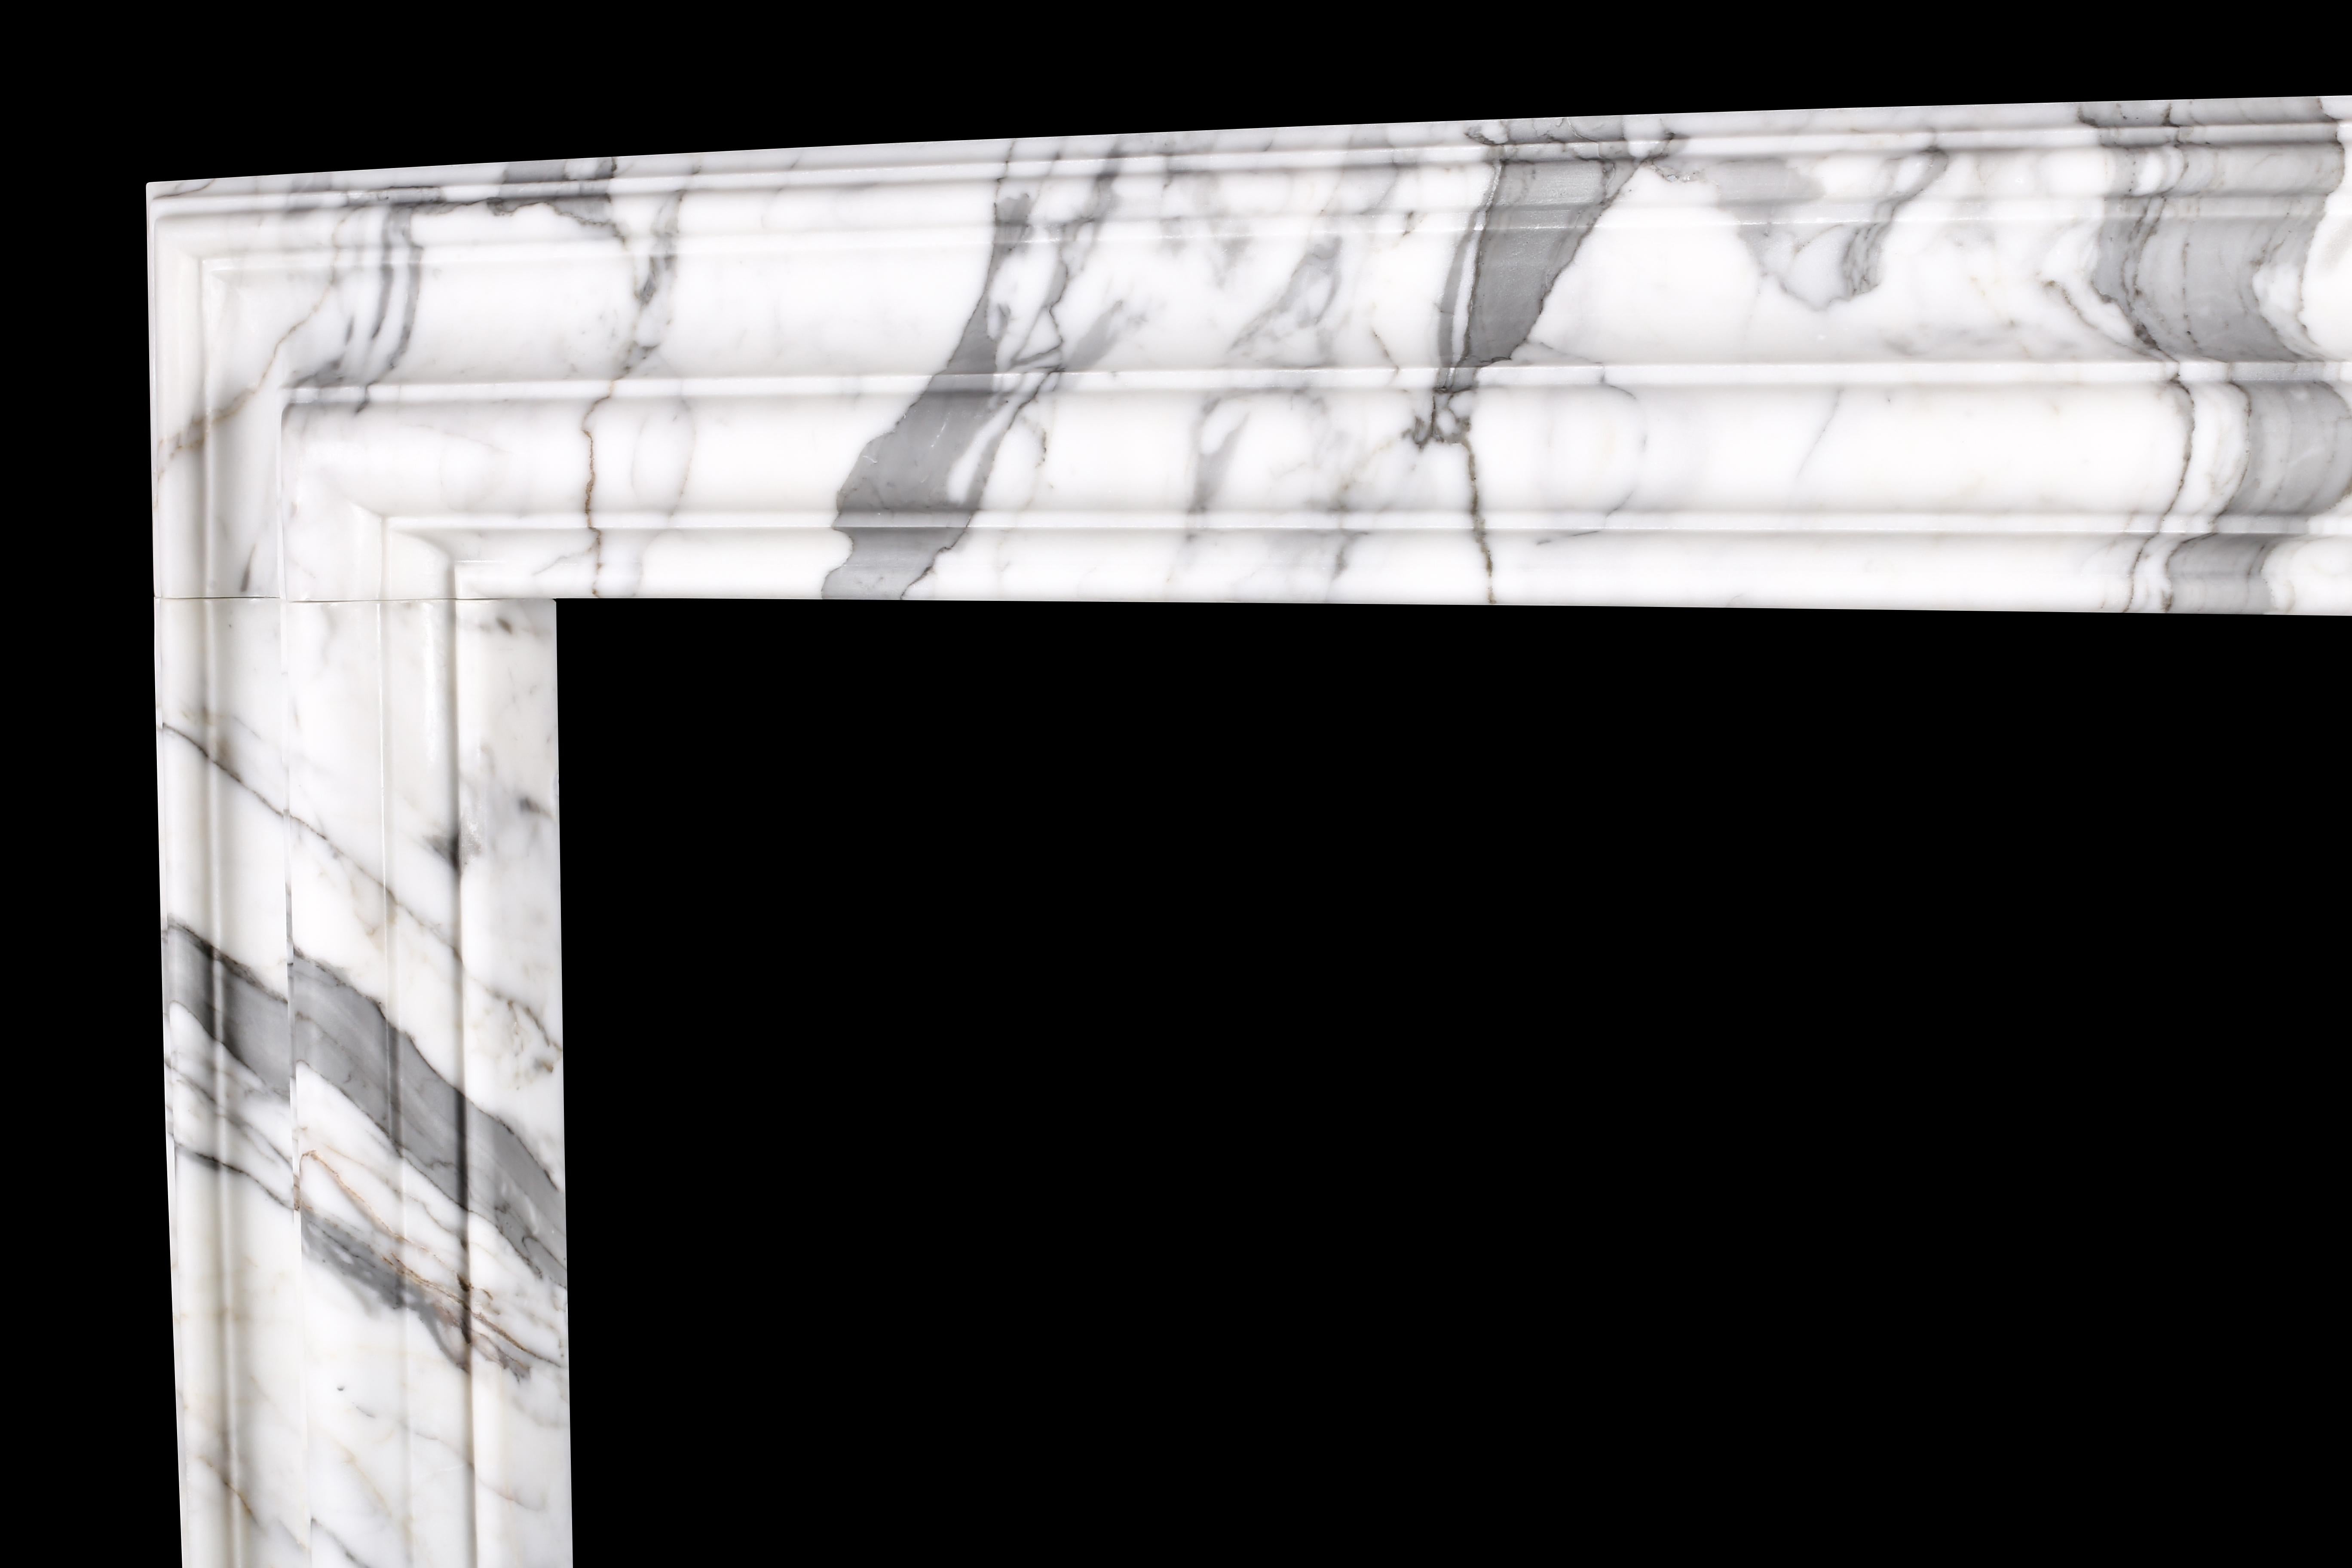 A baroque bolection fireplace mantel (fireplace) in Italian white statuary marble 5.

A Baroque style bolection fireplace surround of bold proportions with very finely carved columns with a rising ogee edging, which are supported on substantial